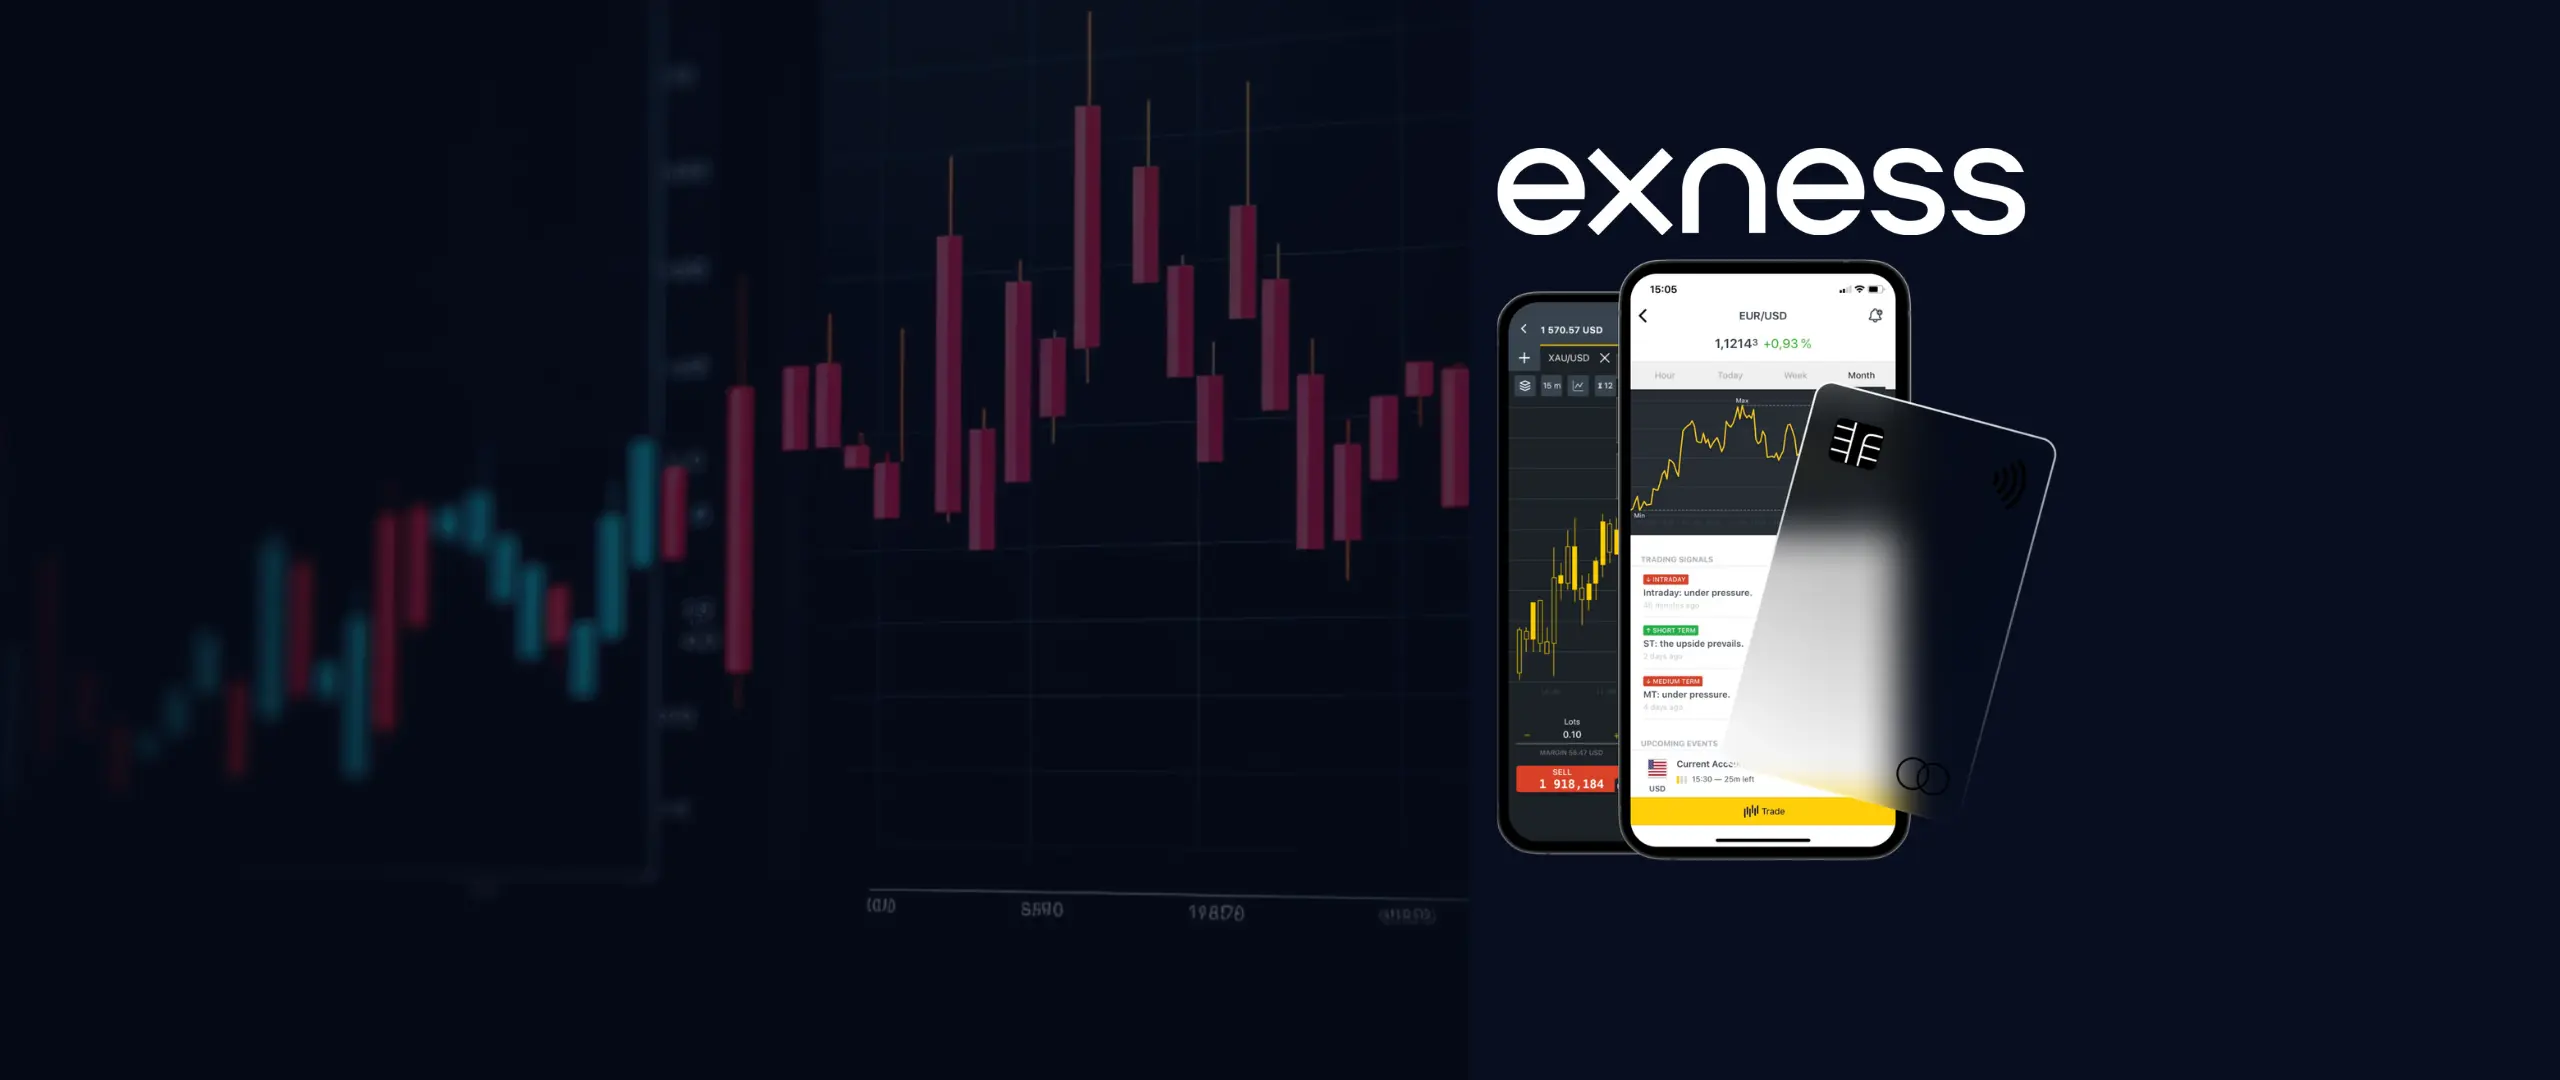 Why Exness MetaTrader 5 Is No Friend To Small Business